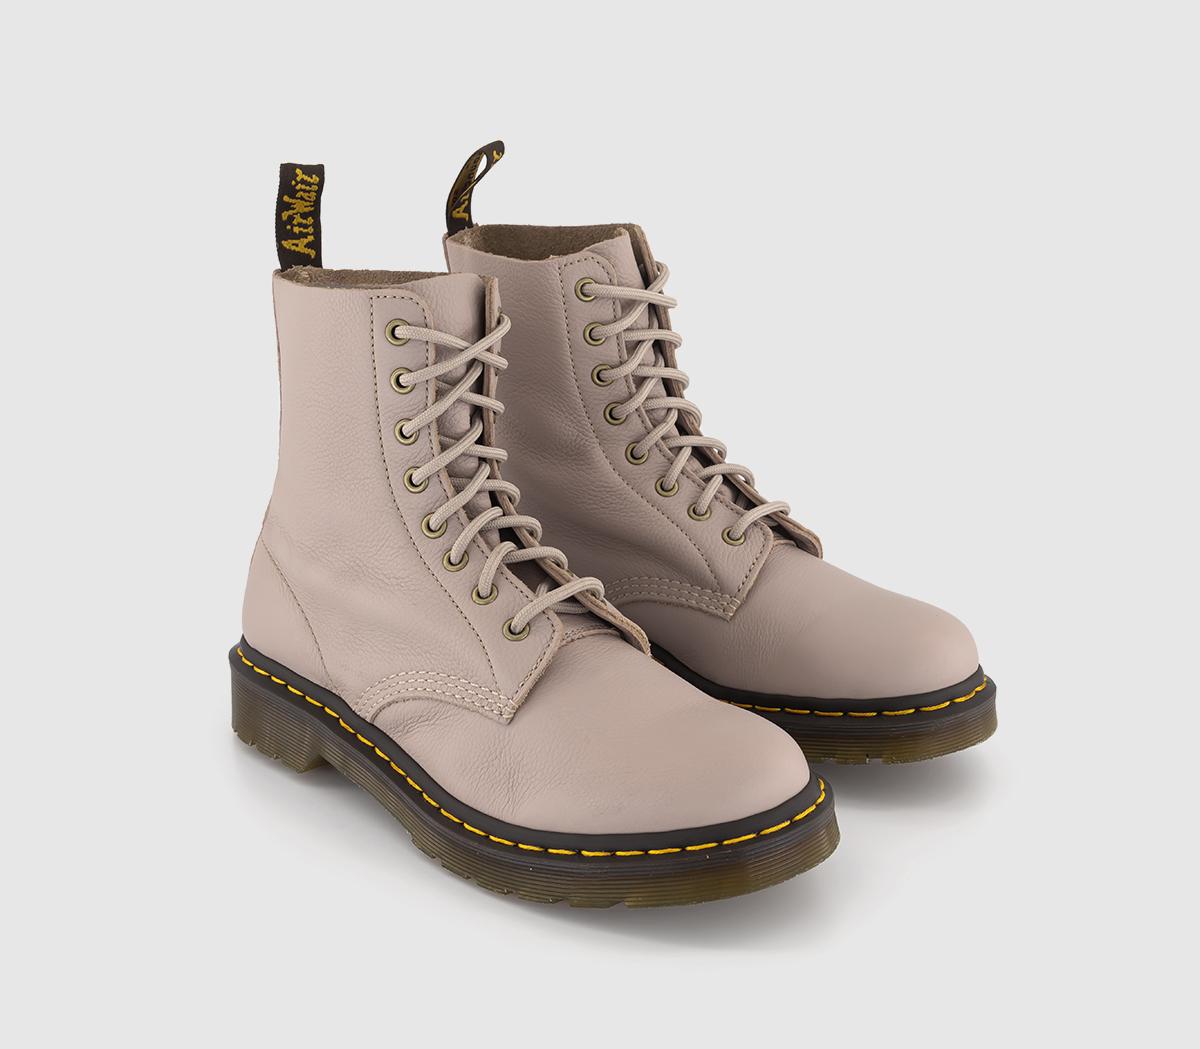 Dr. Martens Womens 8 Eyelet Lace Up Boots Vintage Taupe